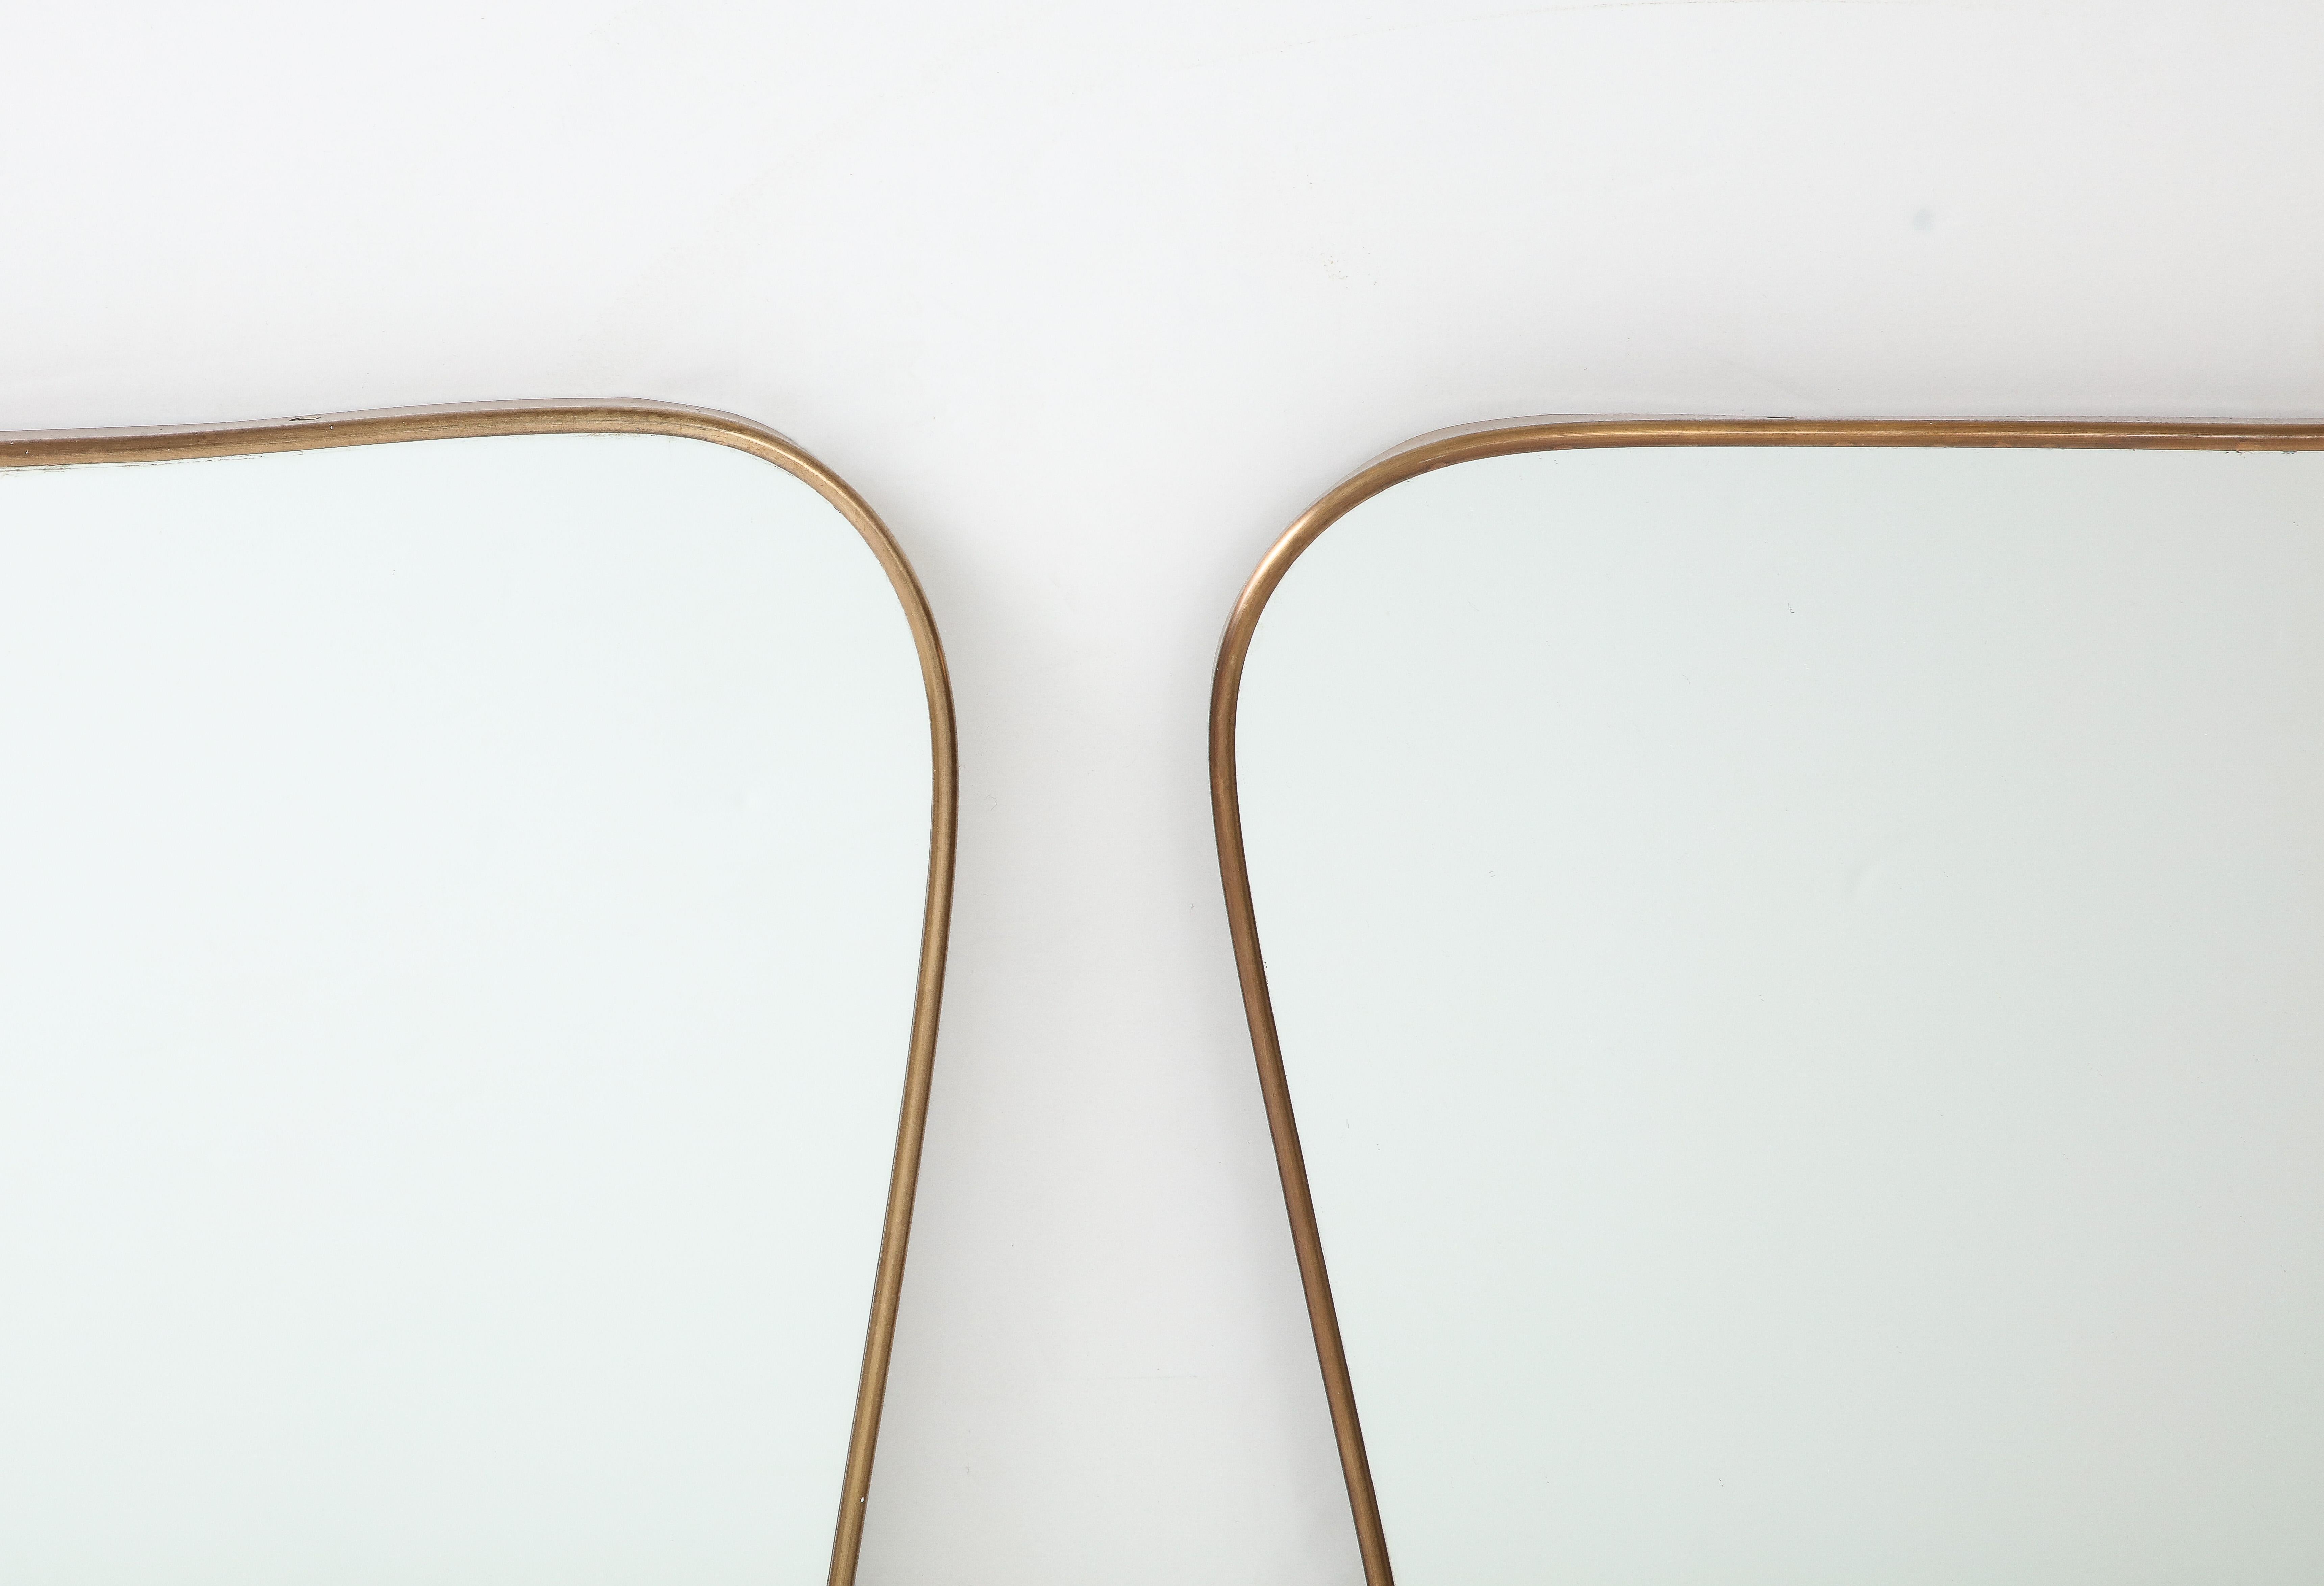 Mid-20th Century Midcentury Italian Modernist Pair of Large Shaped Brass Mirrors, 1950s For Sale